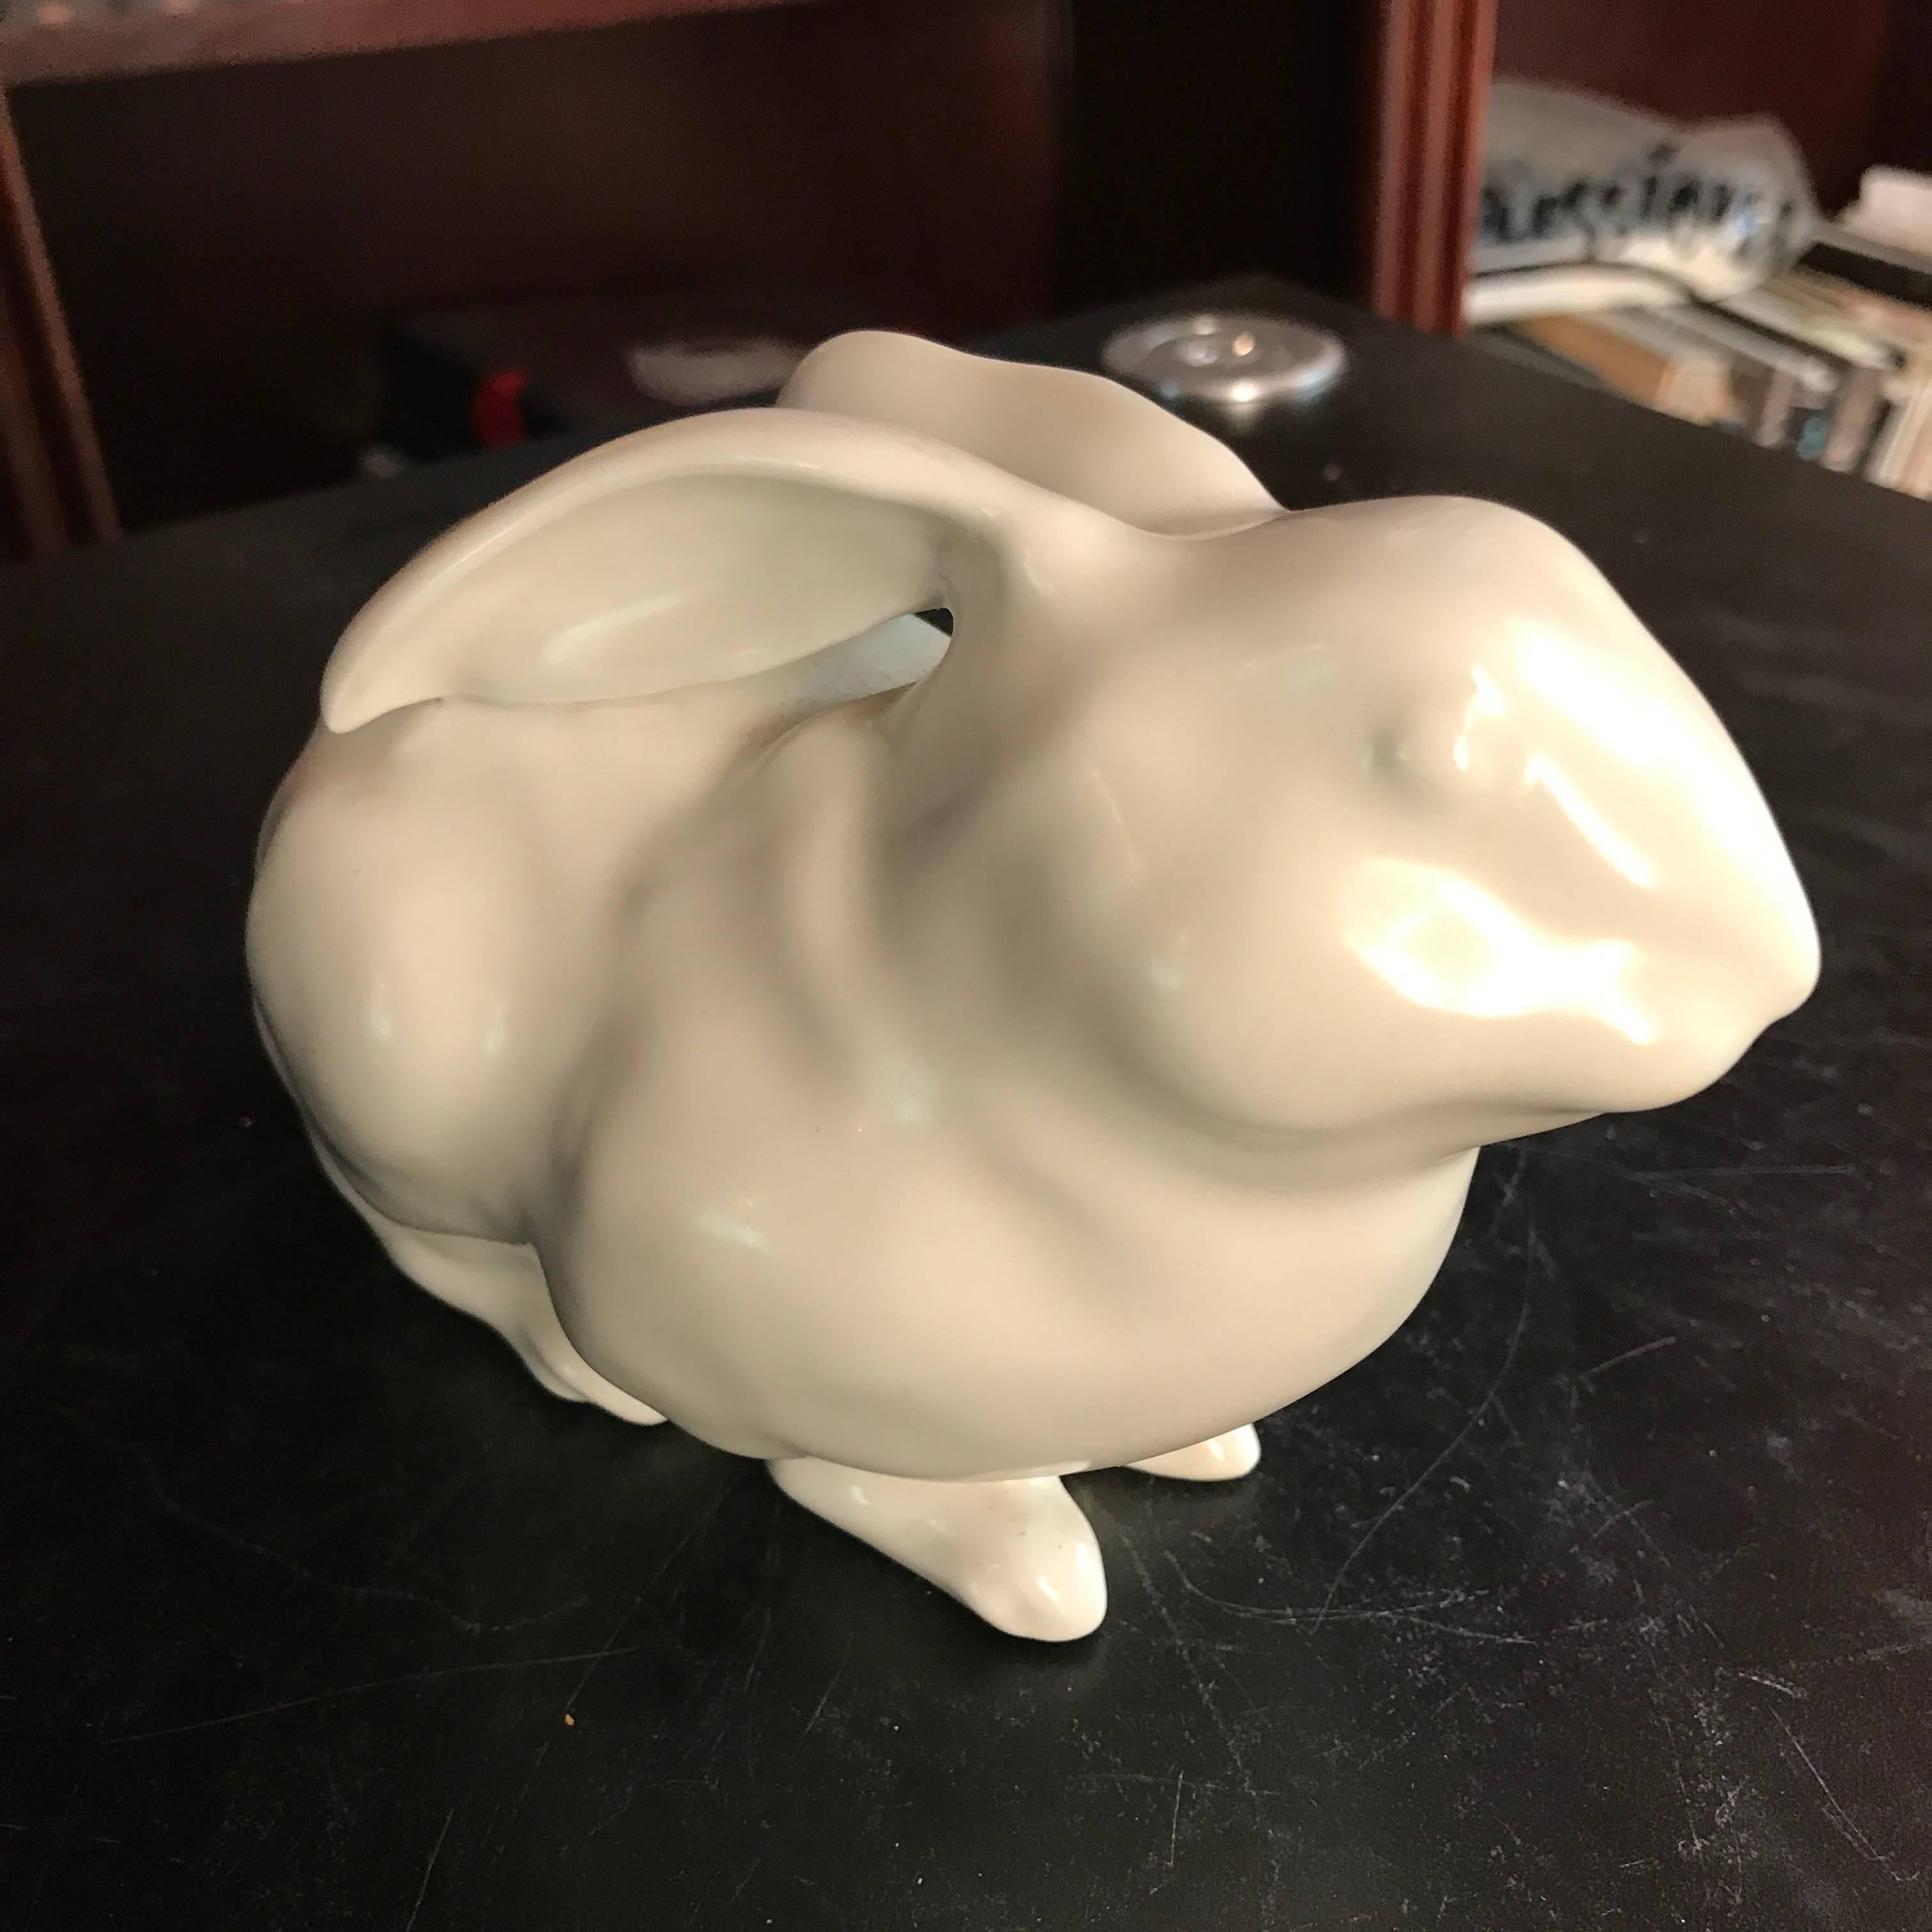 Showa Japan Big Ear Rabbit Pure White Mint, Signed and Boxed